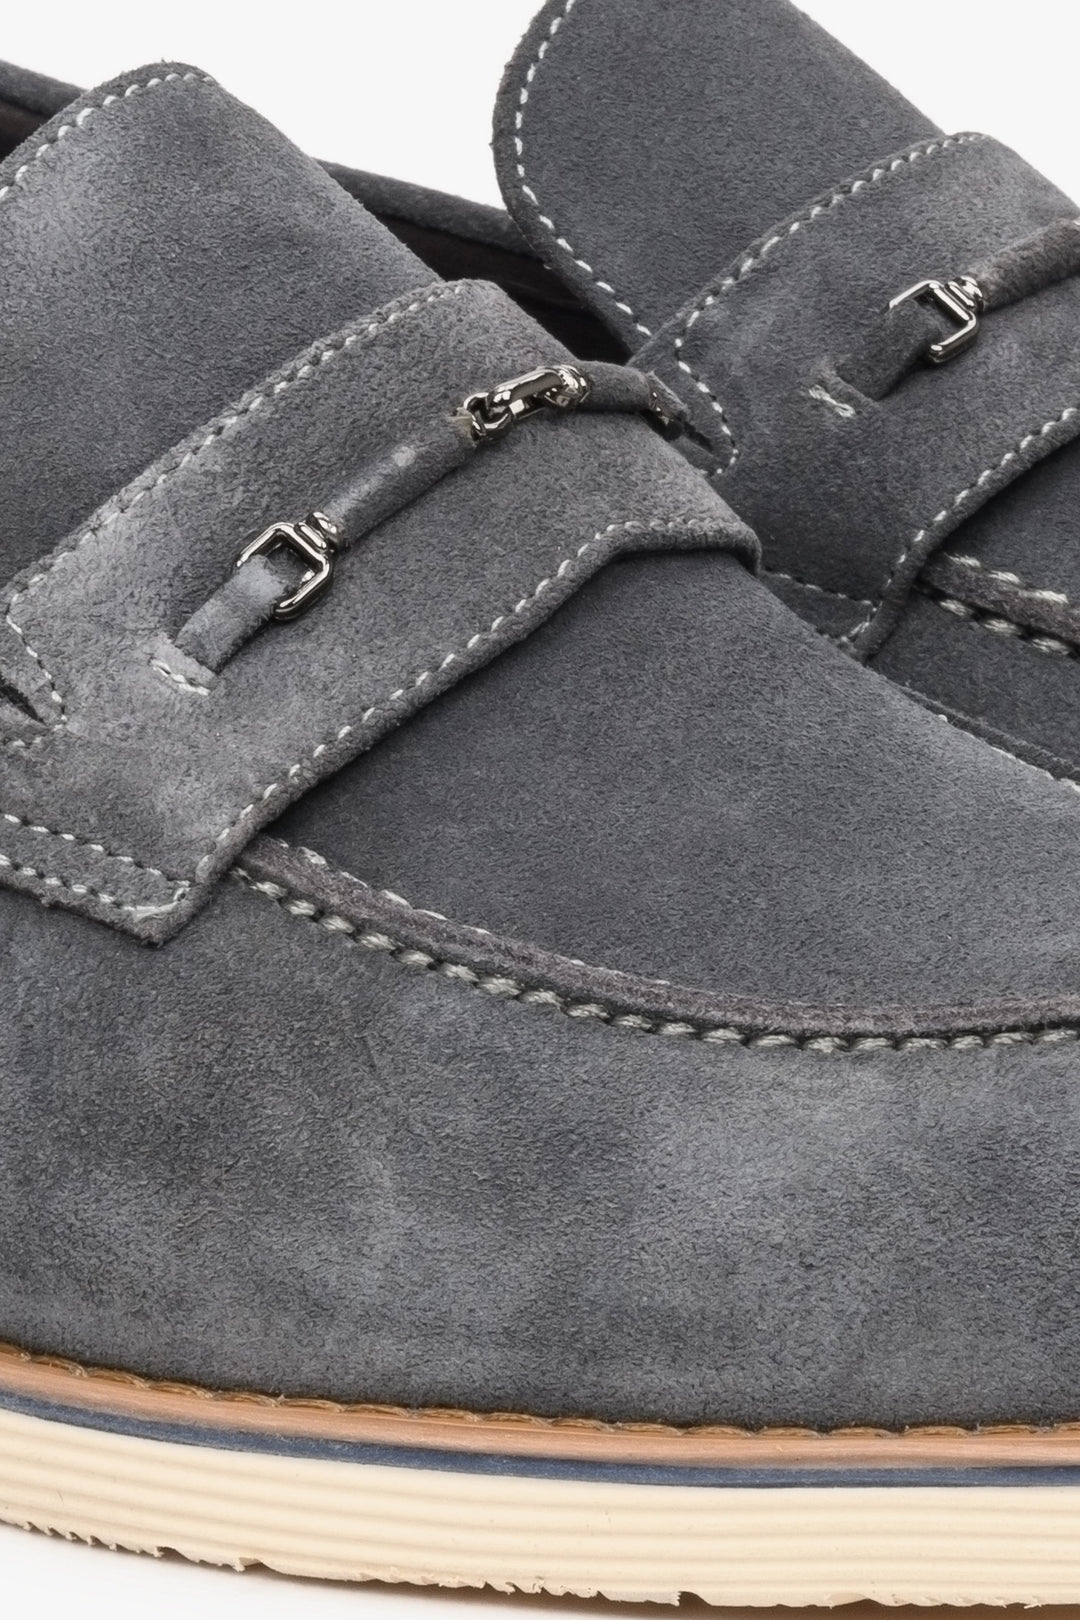 Men's grey velour loafers - close-up on the details.